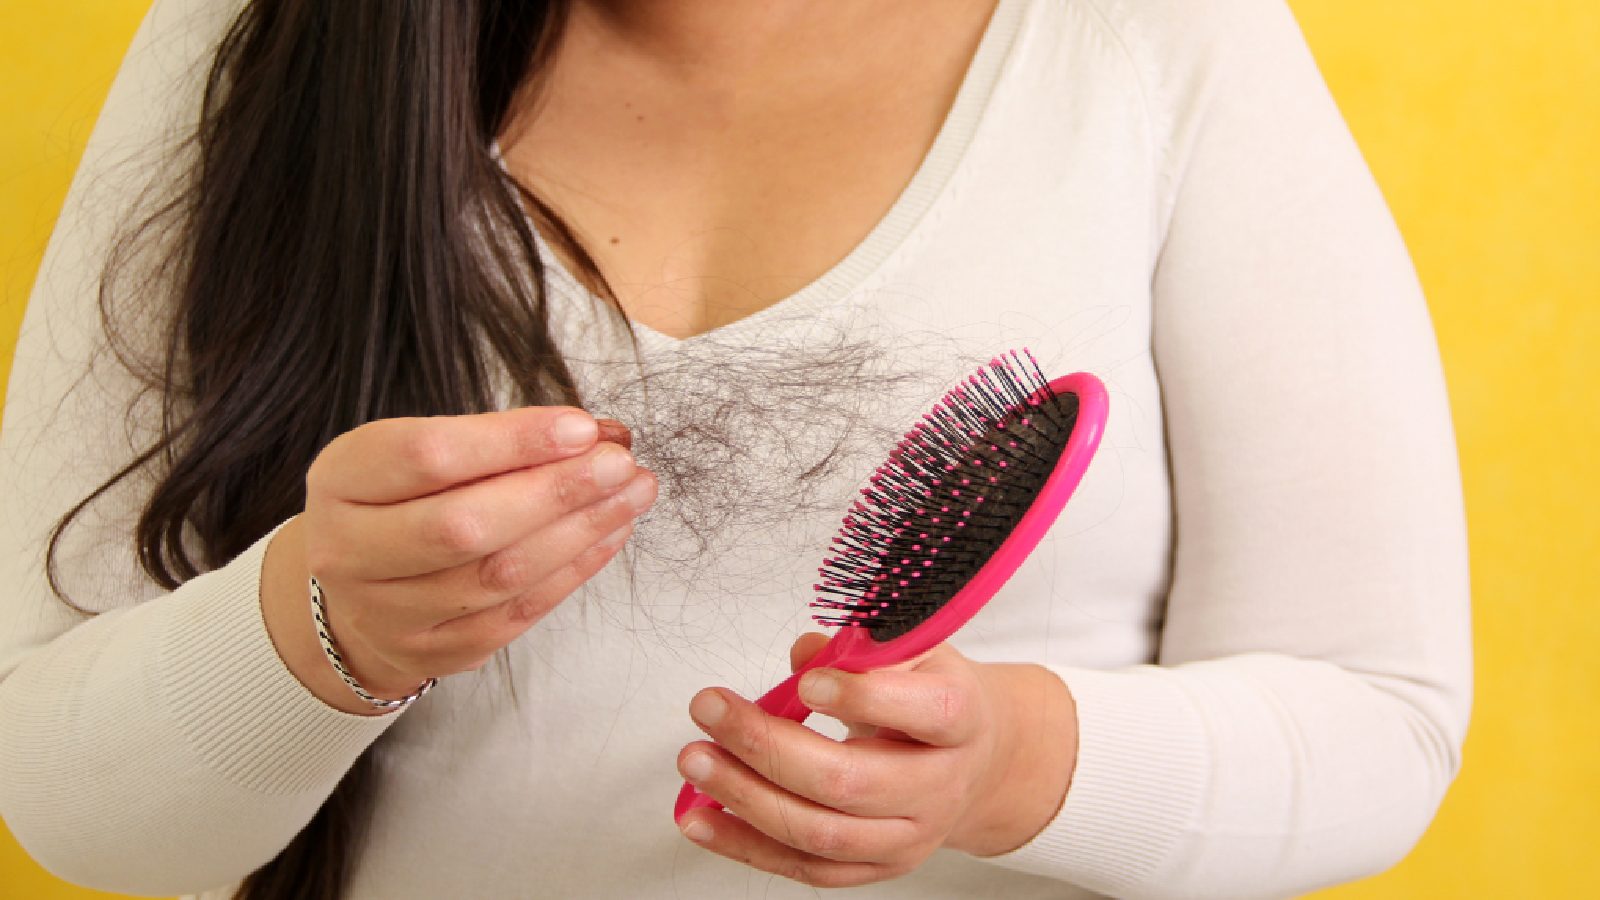 Postpartum hair loss: 6 tips to reduce hair fall after